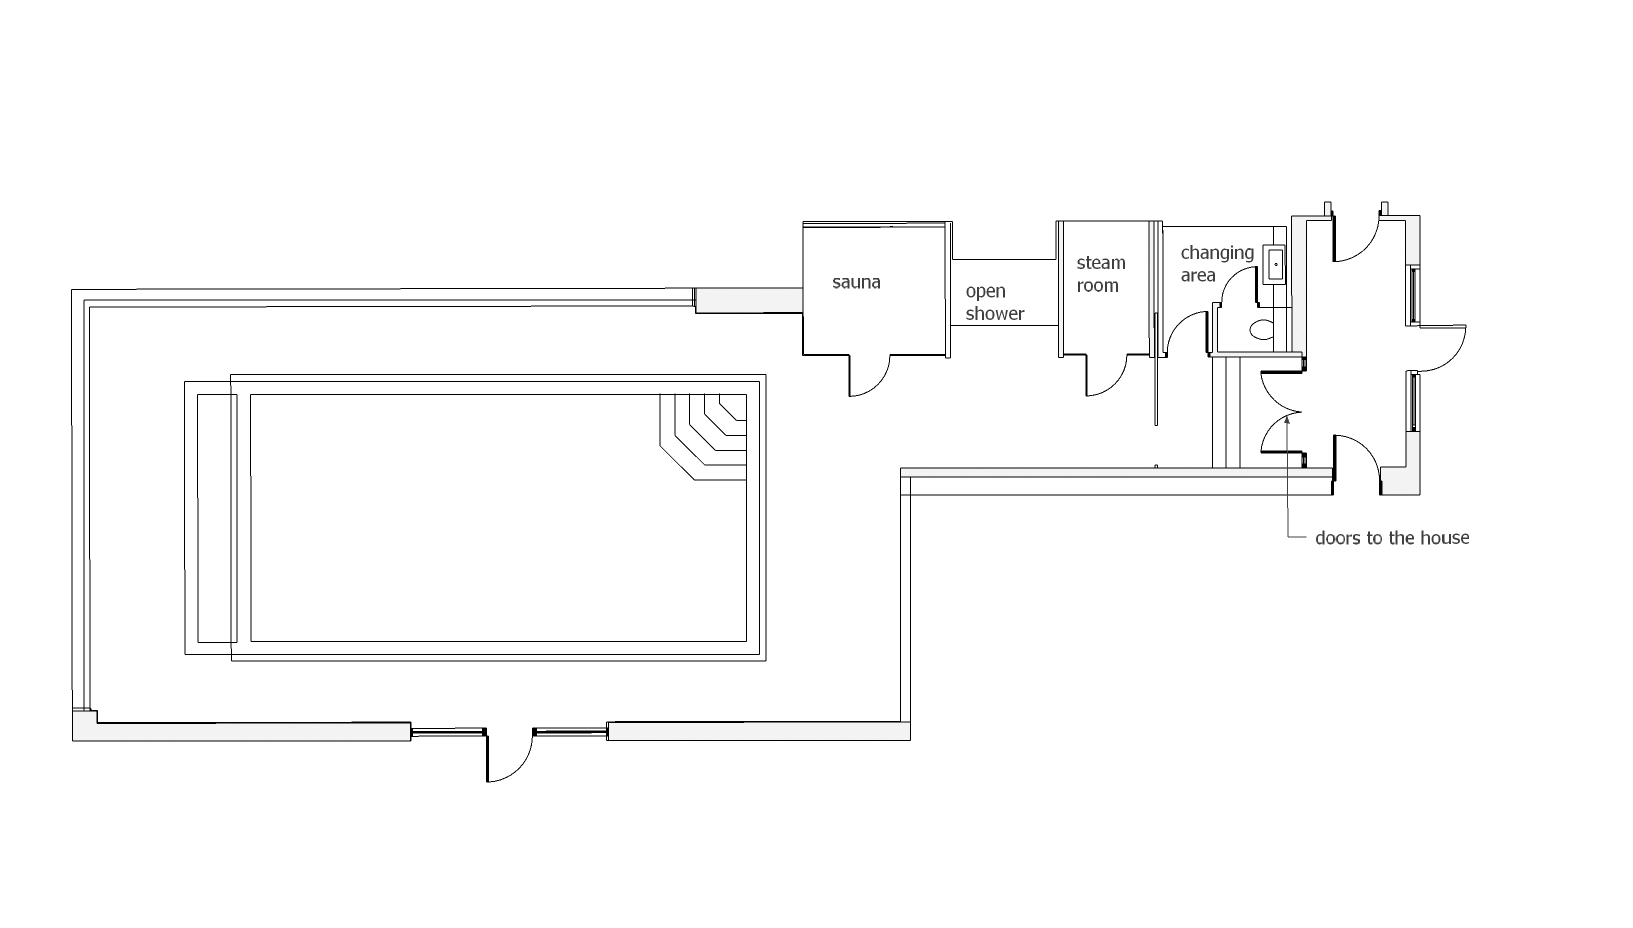 The proposed floor plan showing the pool and gym areas.